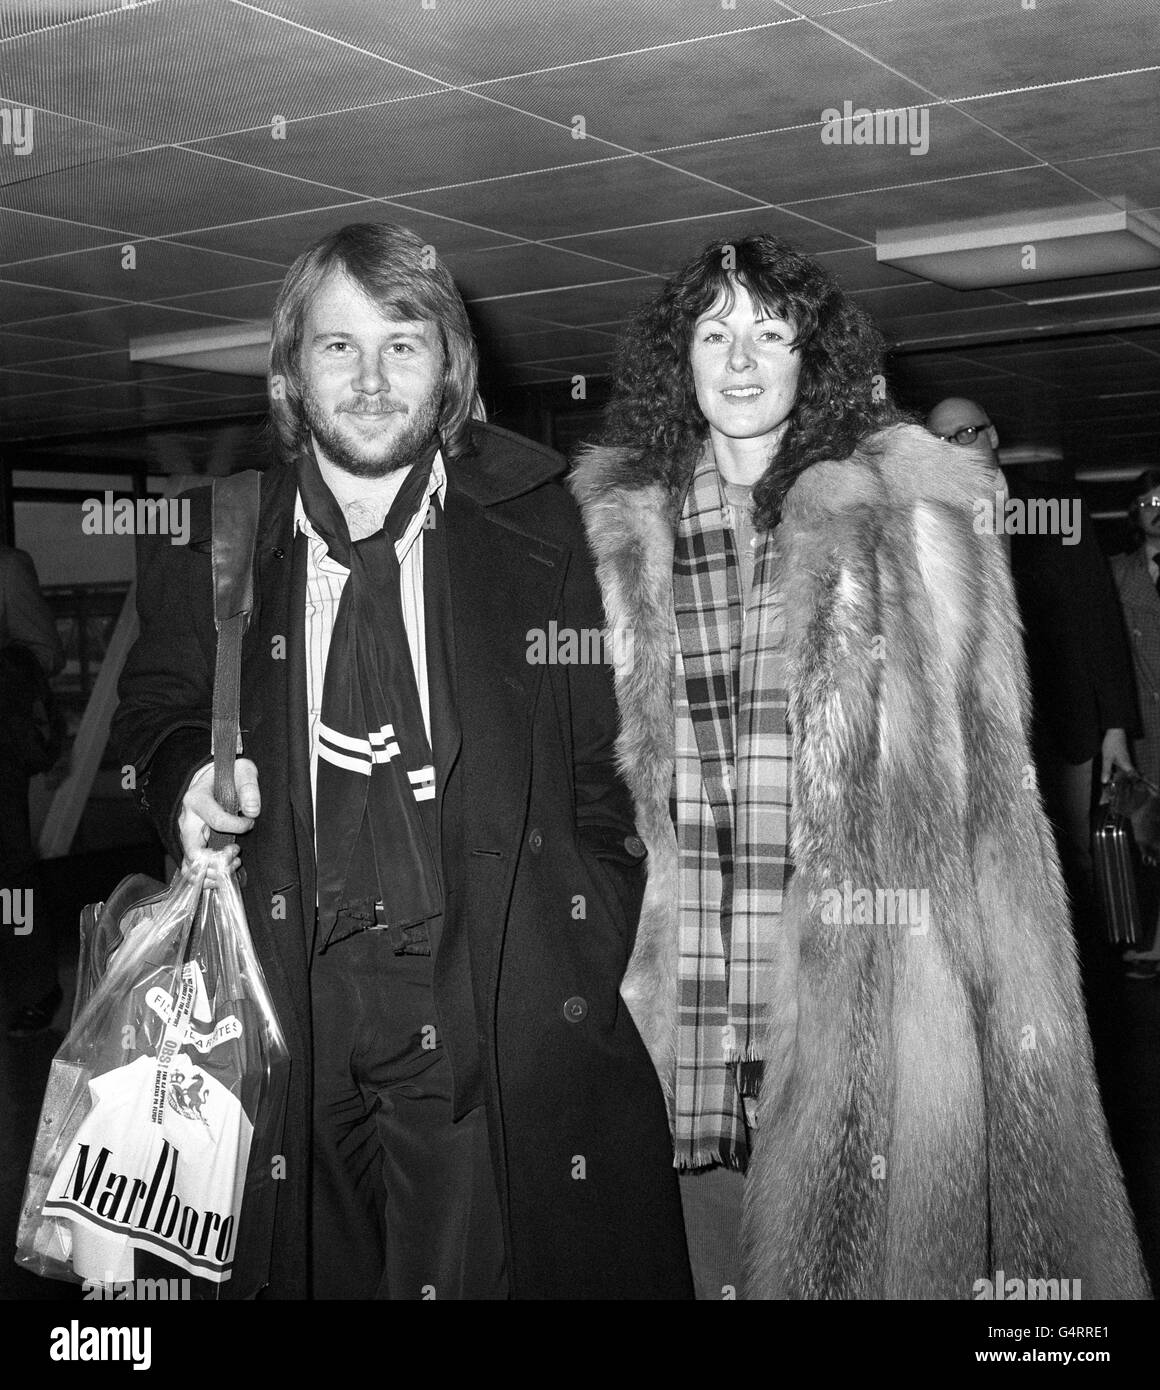 Anni-Frid Lyngstad and Benny Andersson, two members of the chart topping Swedish pop group 'Abba' at London's Heathrow Airport, as they arrive for the premiere of their film Abba - The Movie'. Stock Photo